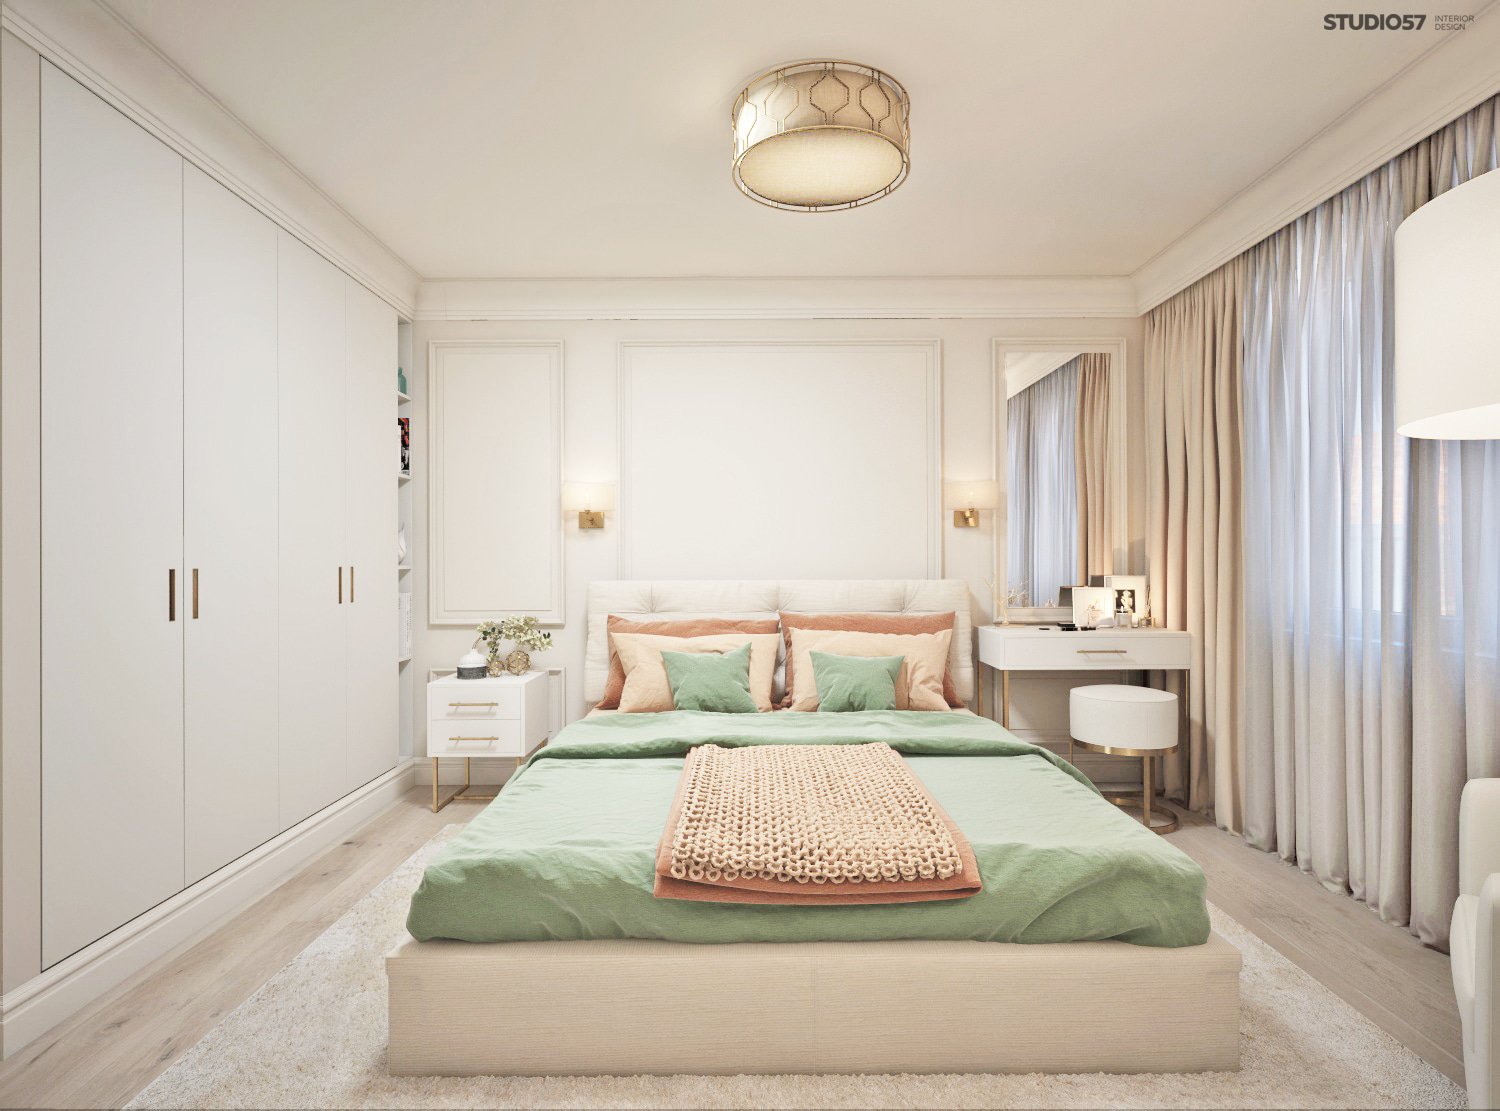 Bedroom in light colors picture